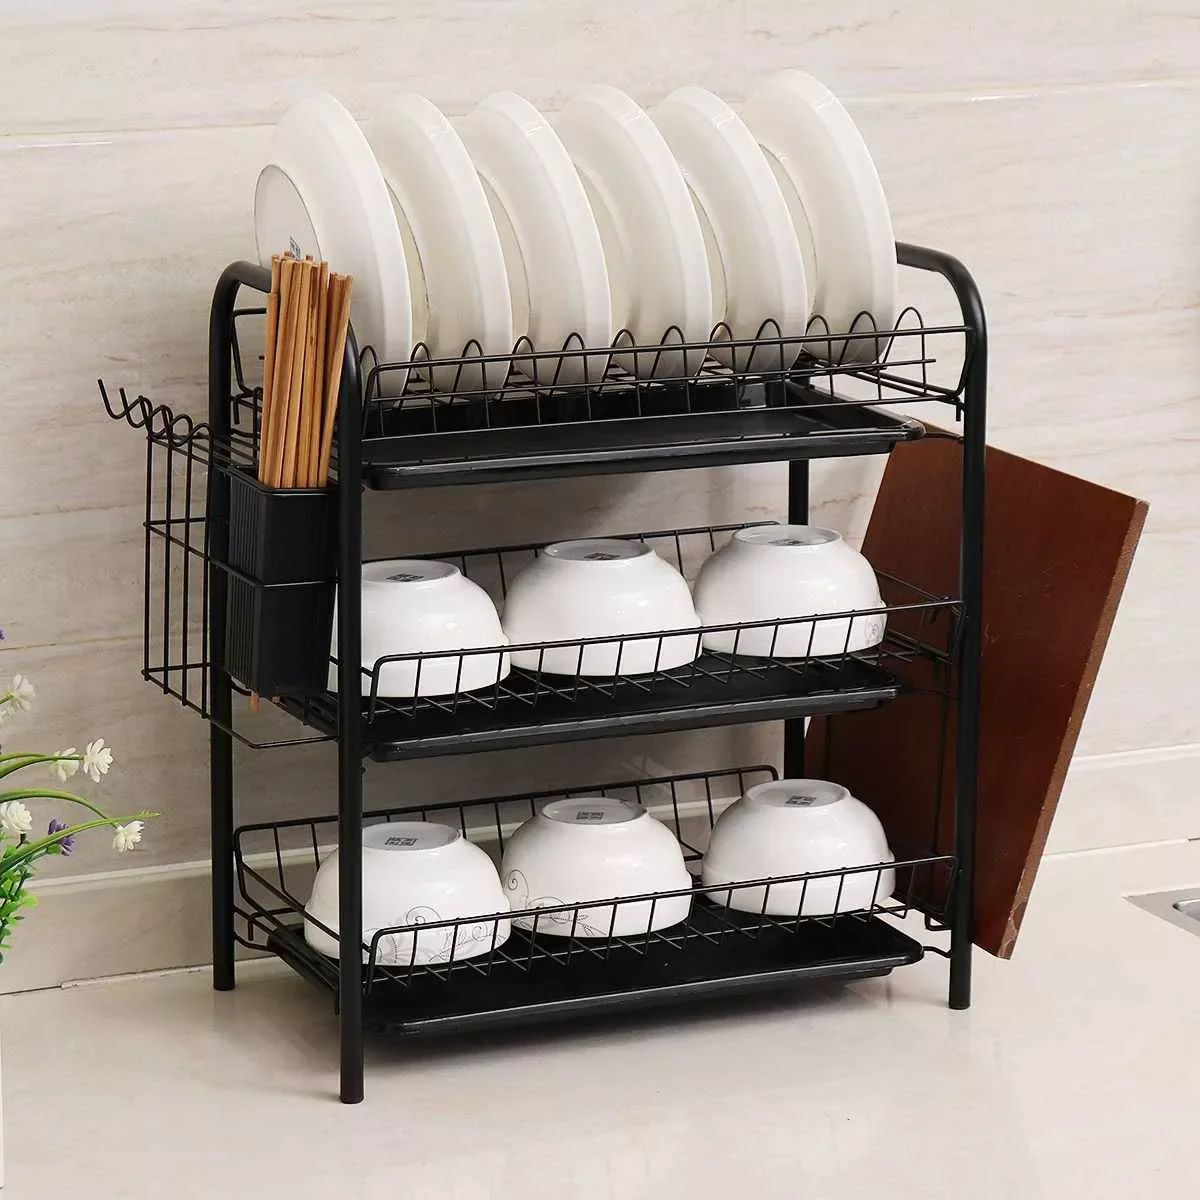 

2/3 Tiers Dish Drying Rack Holder Basket Plated Iron Home Washing Great Kitchen Sink Dish Drainer Drying Rack Organizer Black